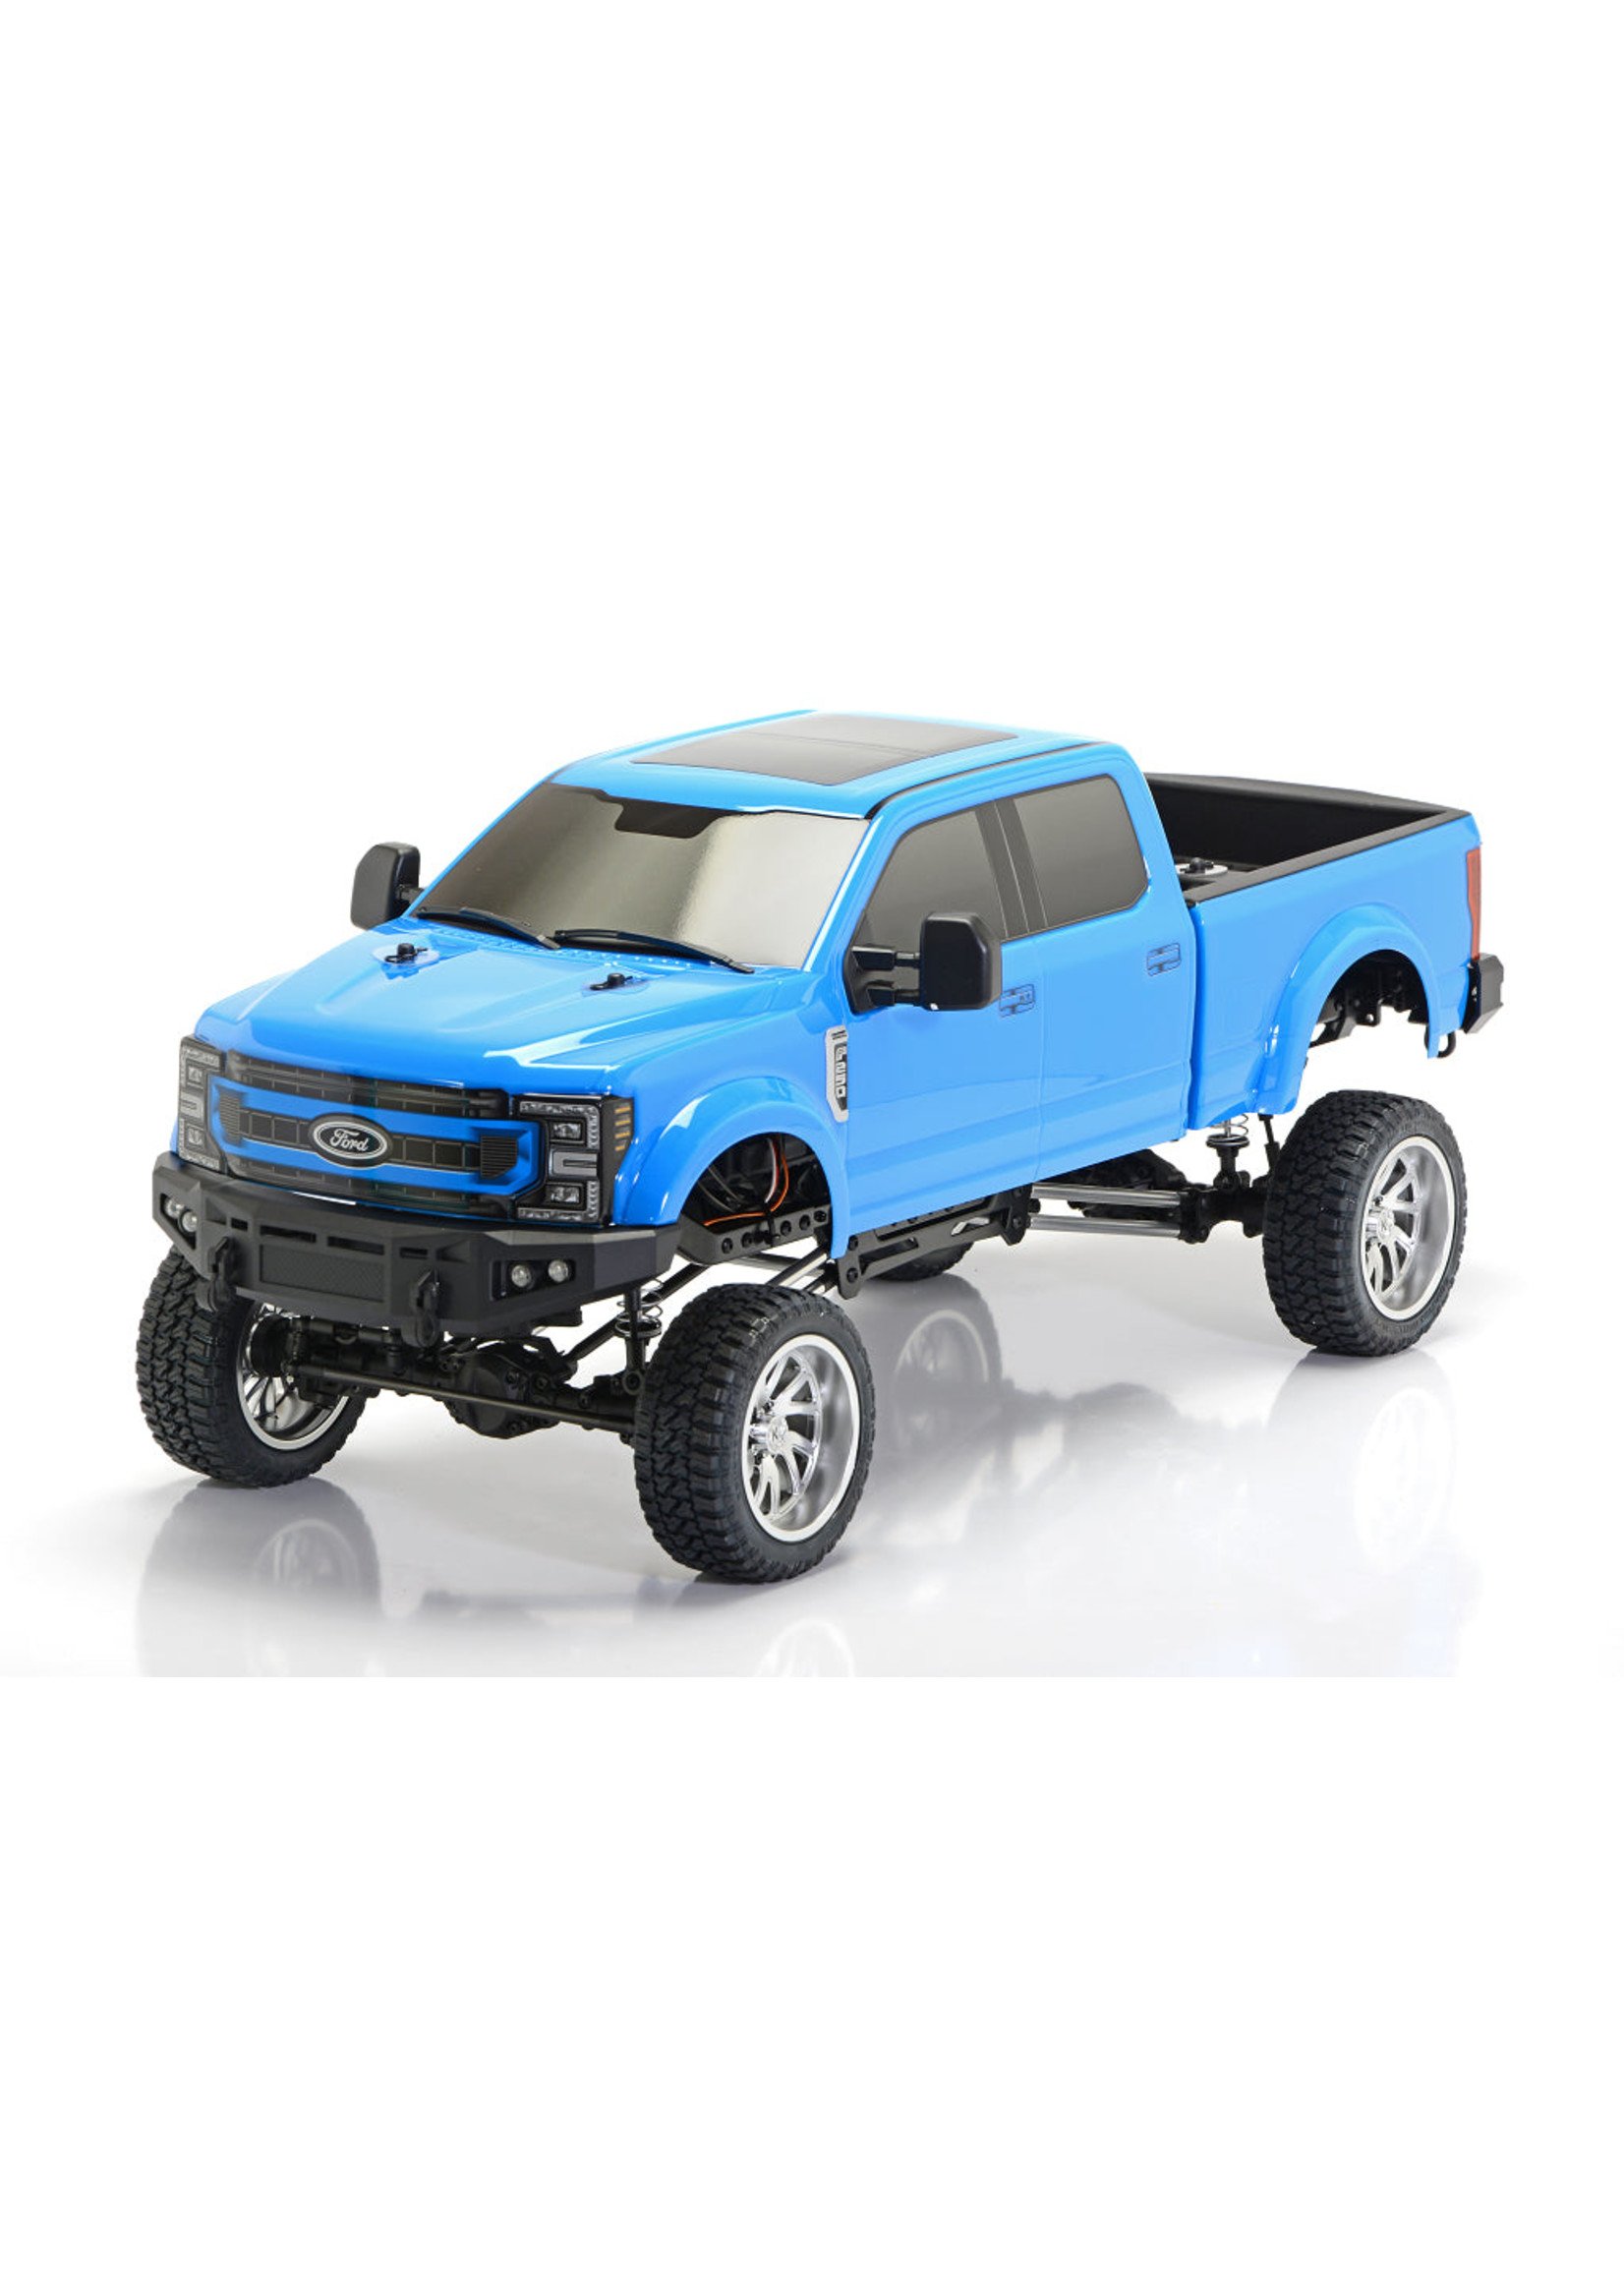 CEN Racing Ford F250 1/10 4WD KG1 Edition Lifted Truck, Daytona Blue - RTR